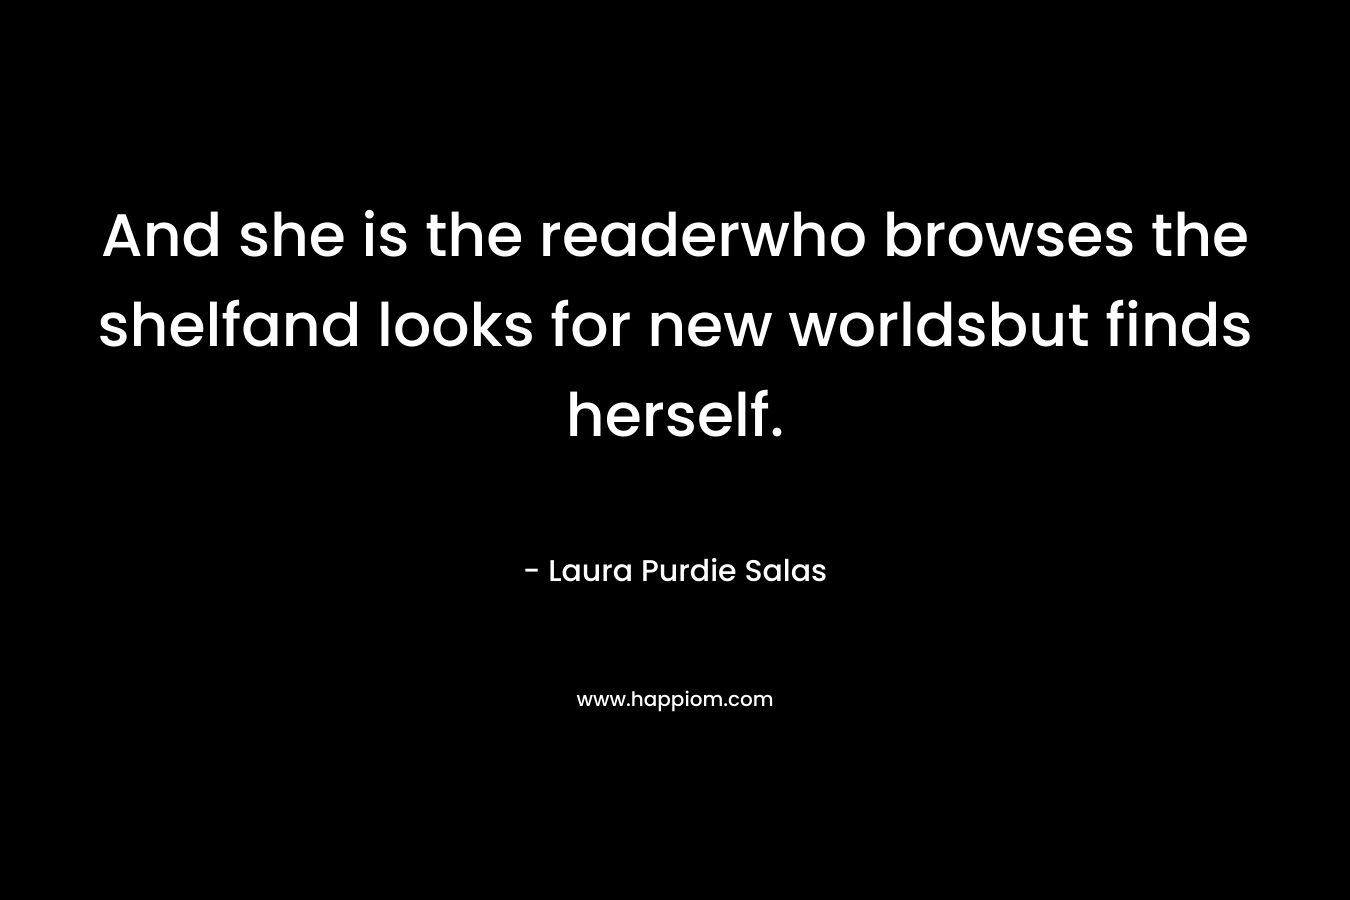 And she is the readerwho browses the shelfand looks for new worldsbut finds herself. – Laura Purdie Salas